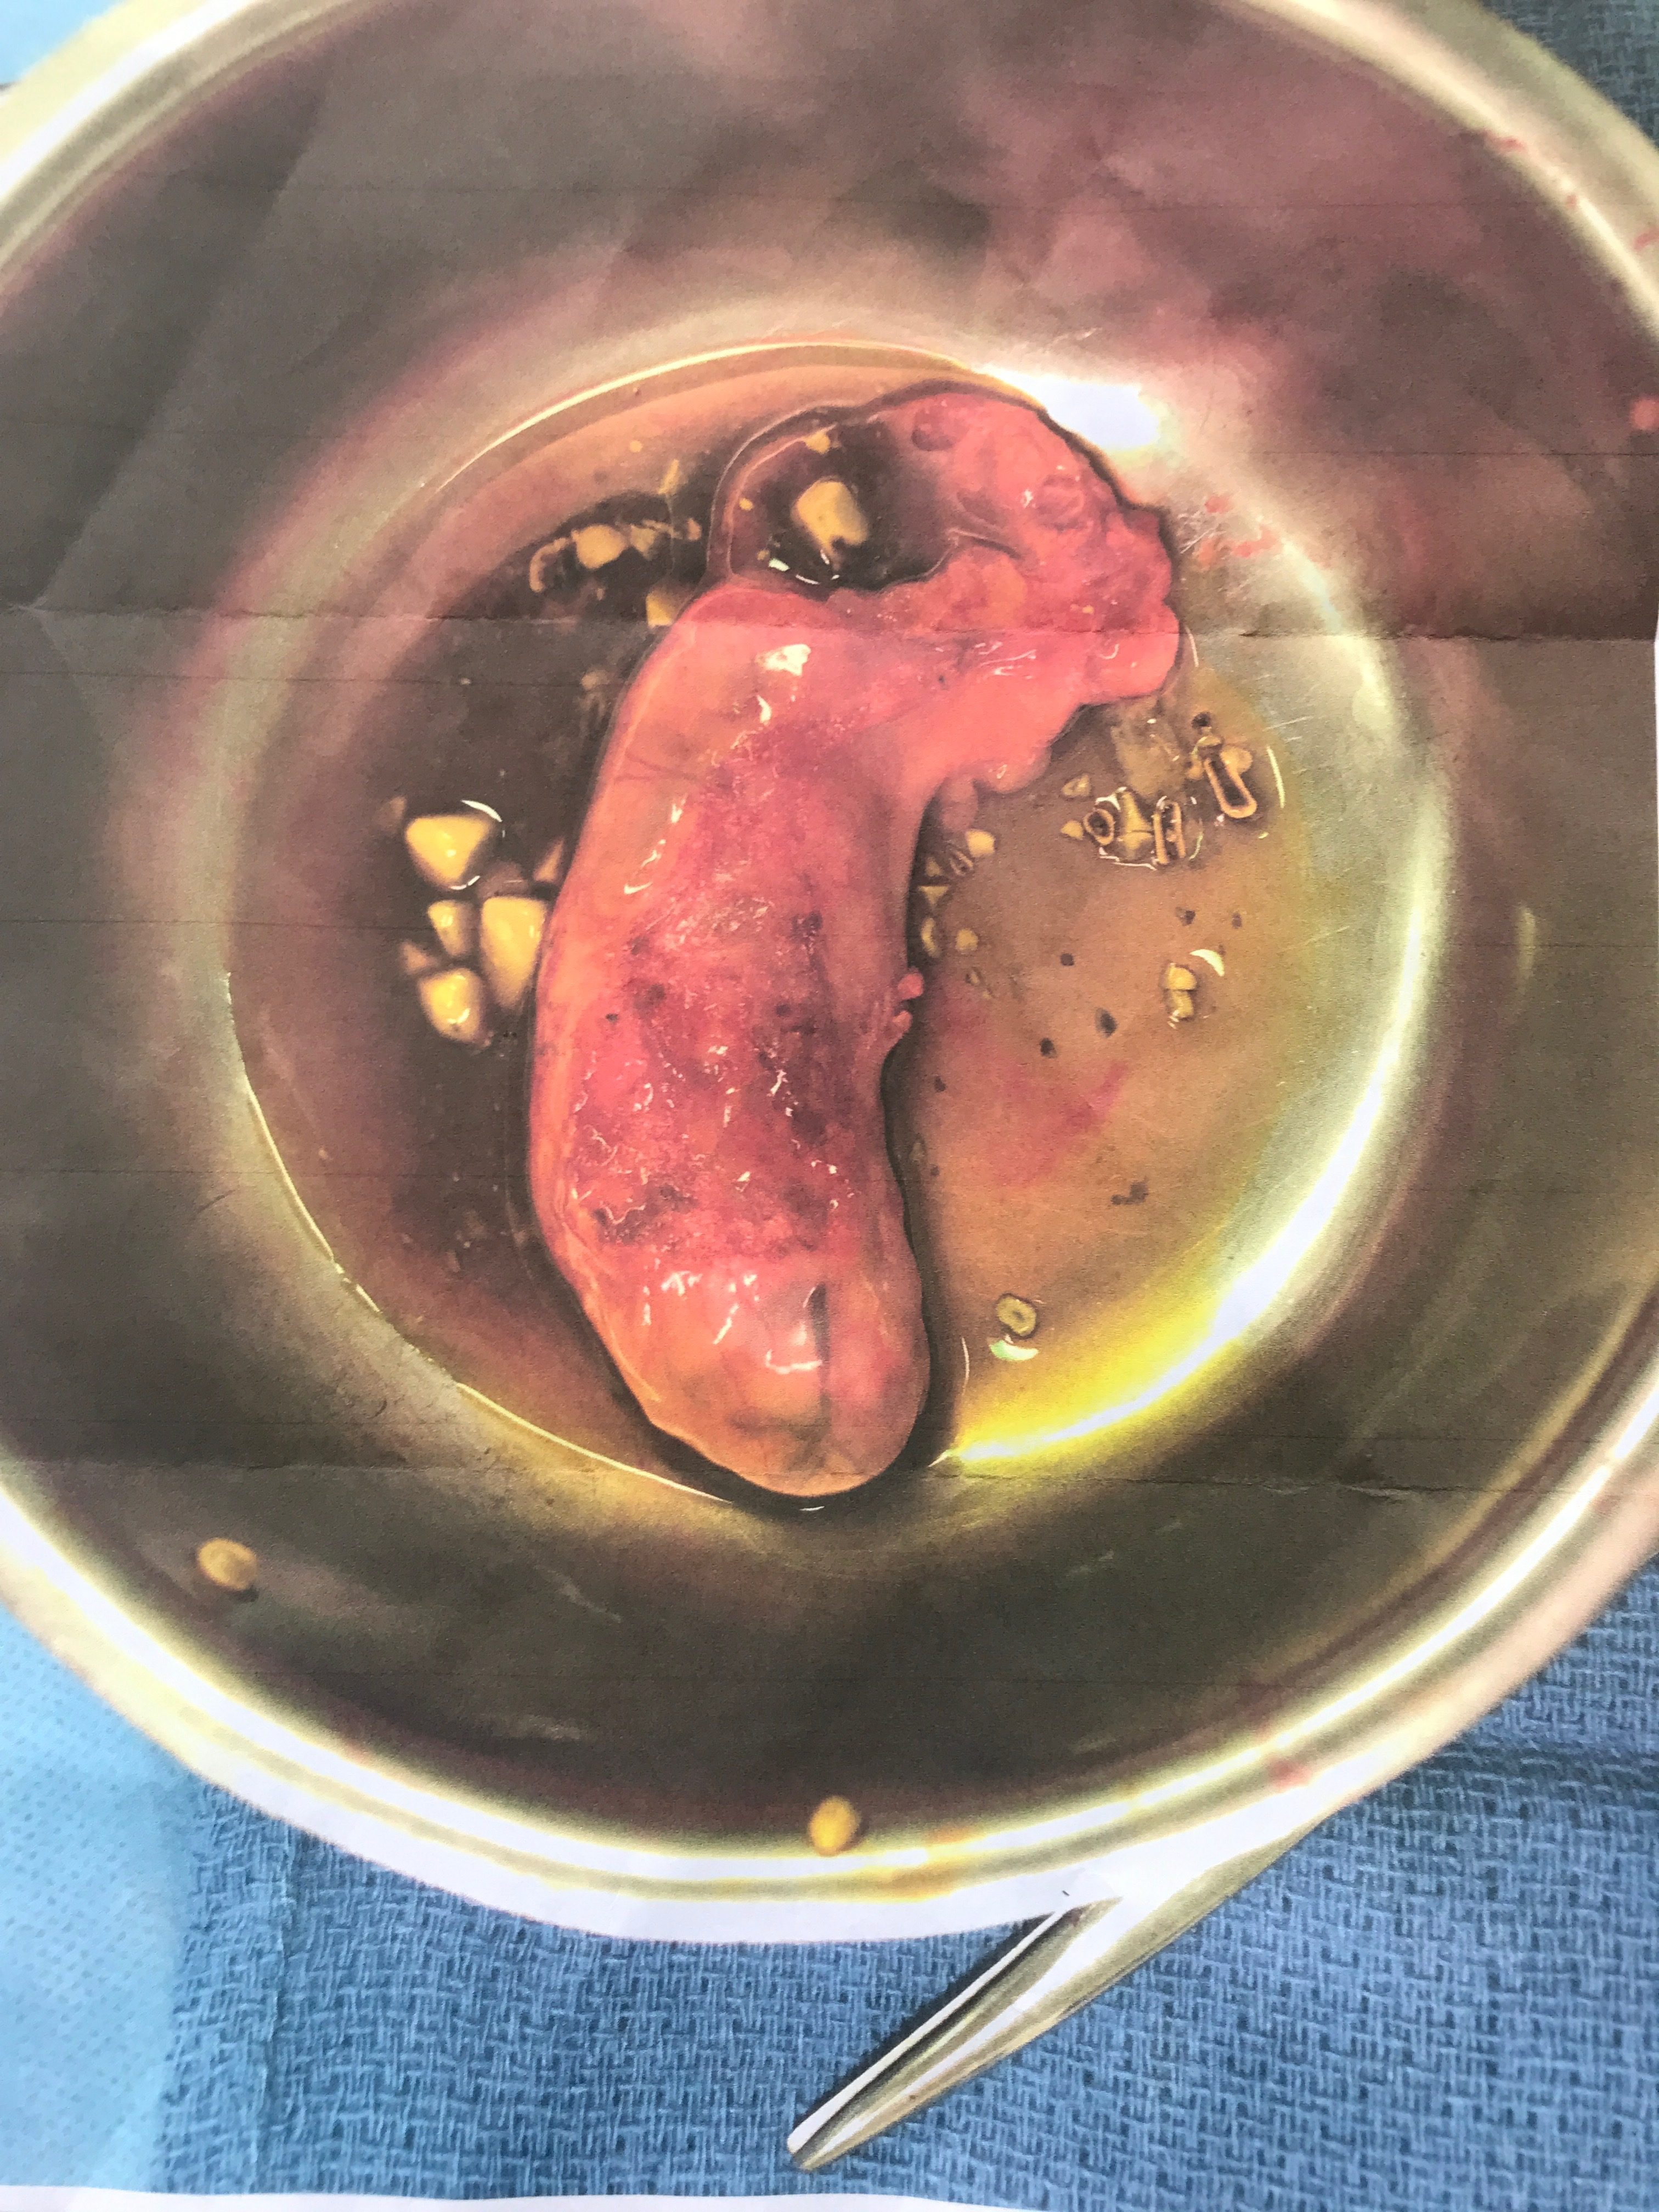 My Inflamed and Diseased Gallbladder with Gallstones